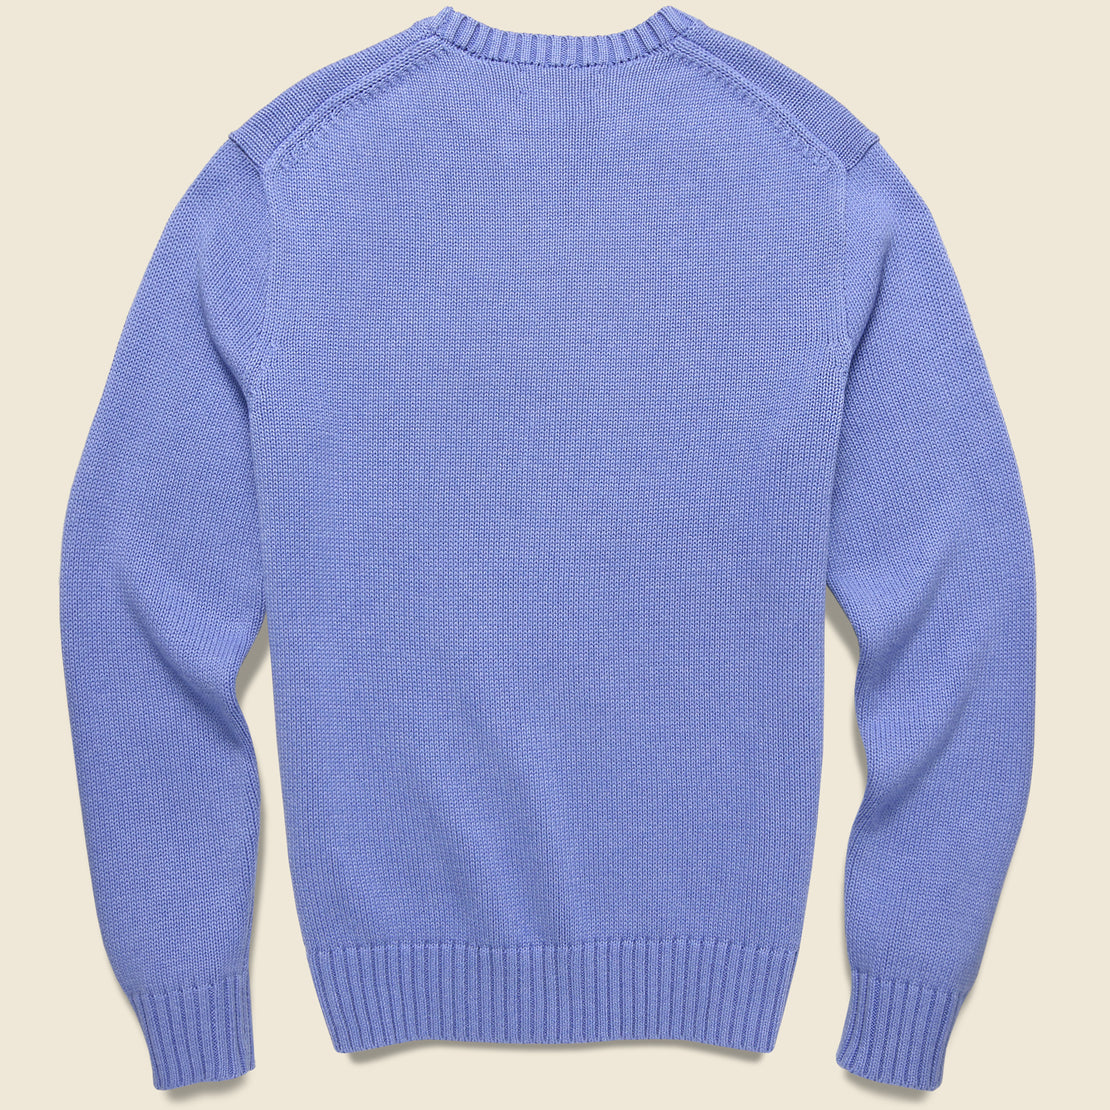 Preppy Bear Crewneck Sweater - Light Blue - Polo Ralph Lauren - STAG Provisions - Tops - Sweater